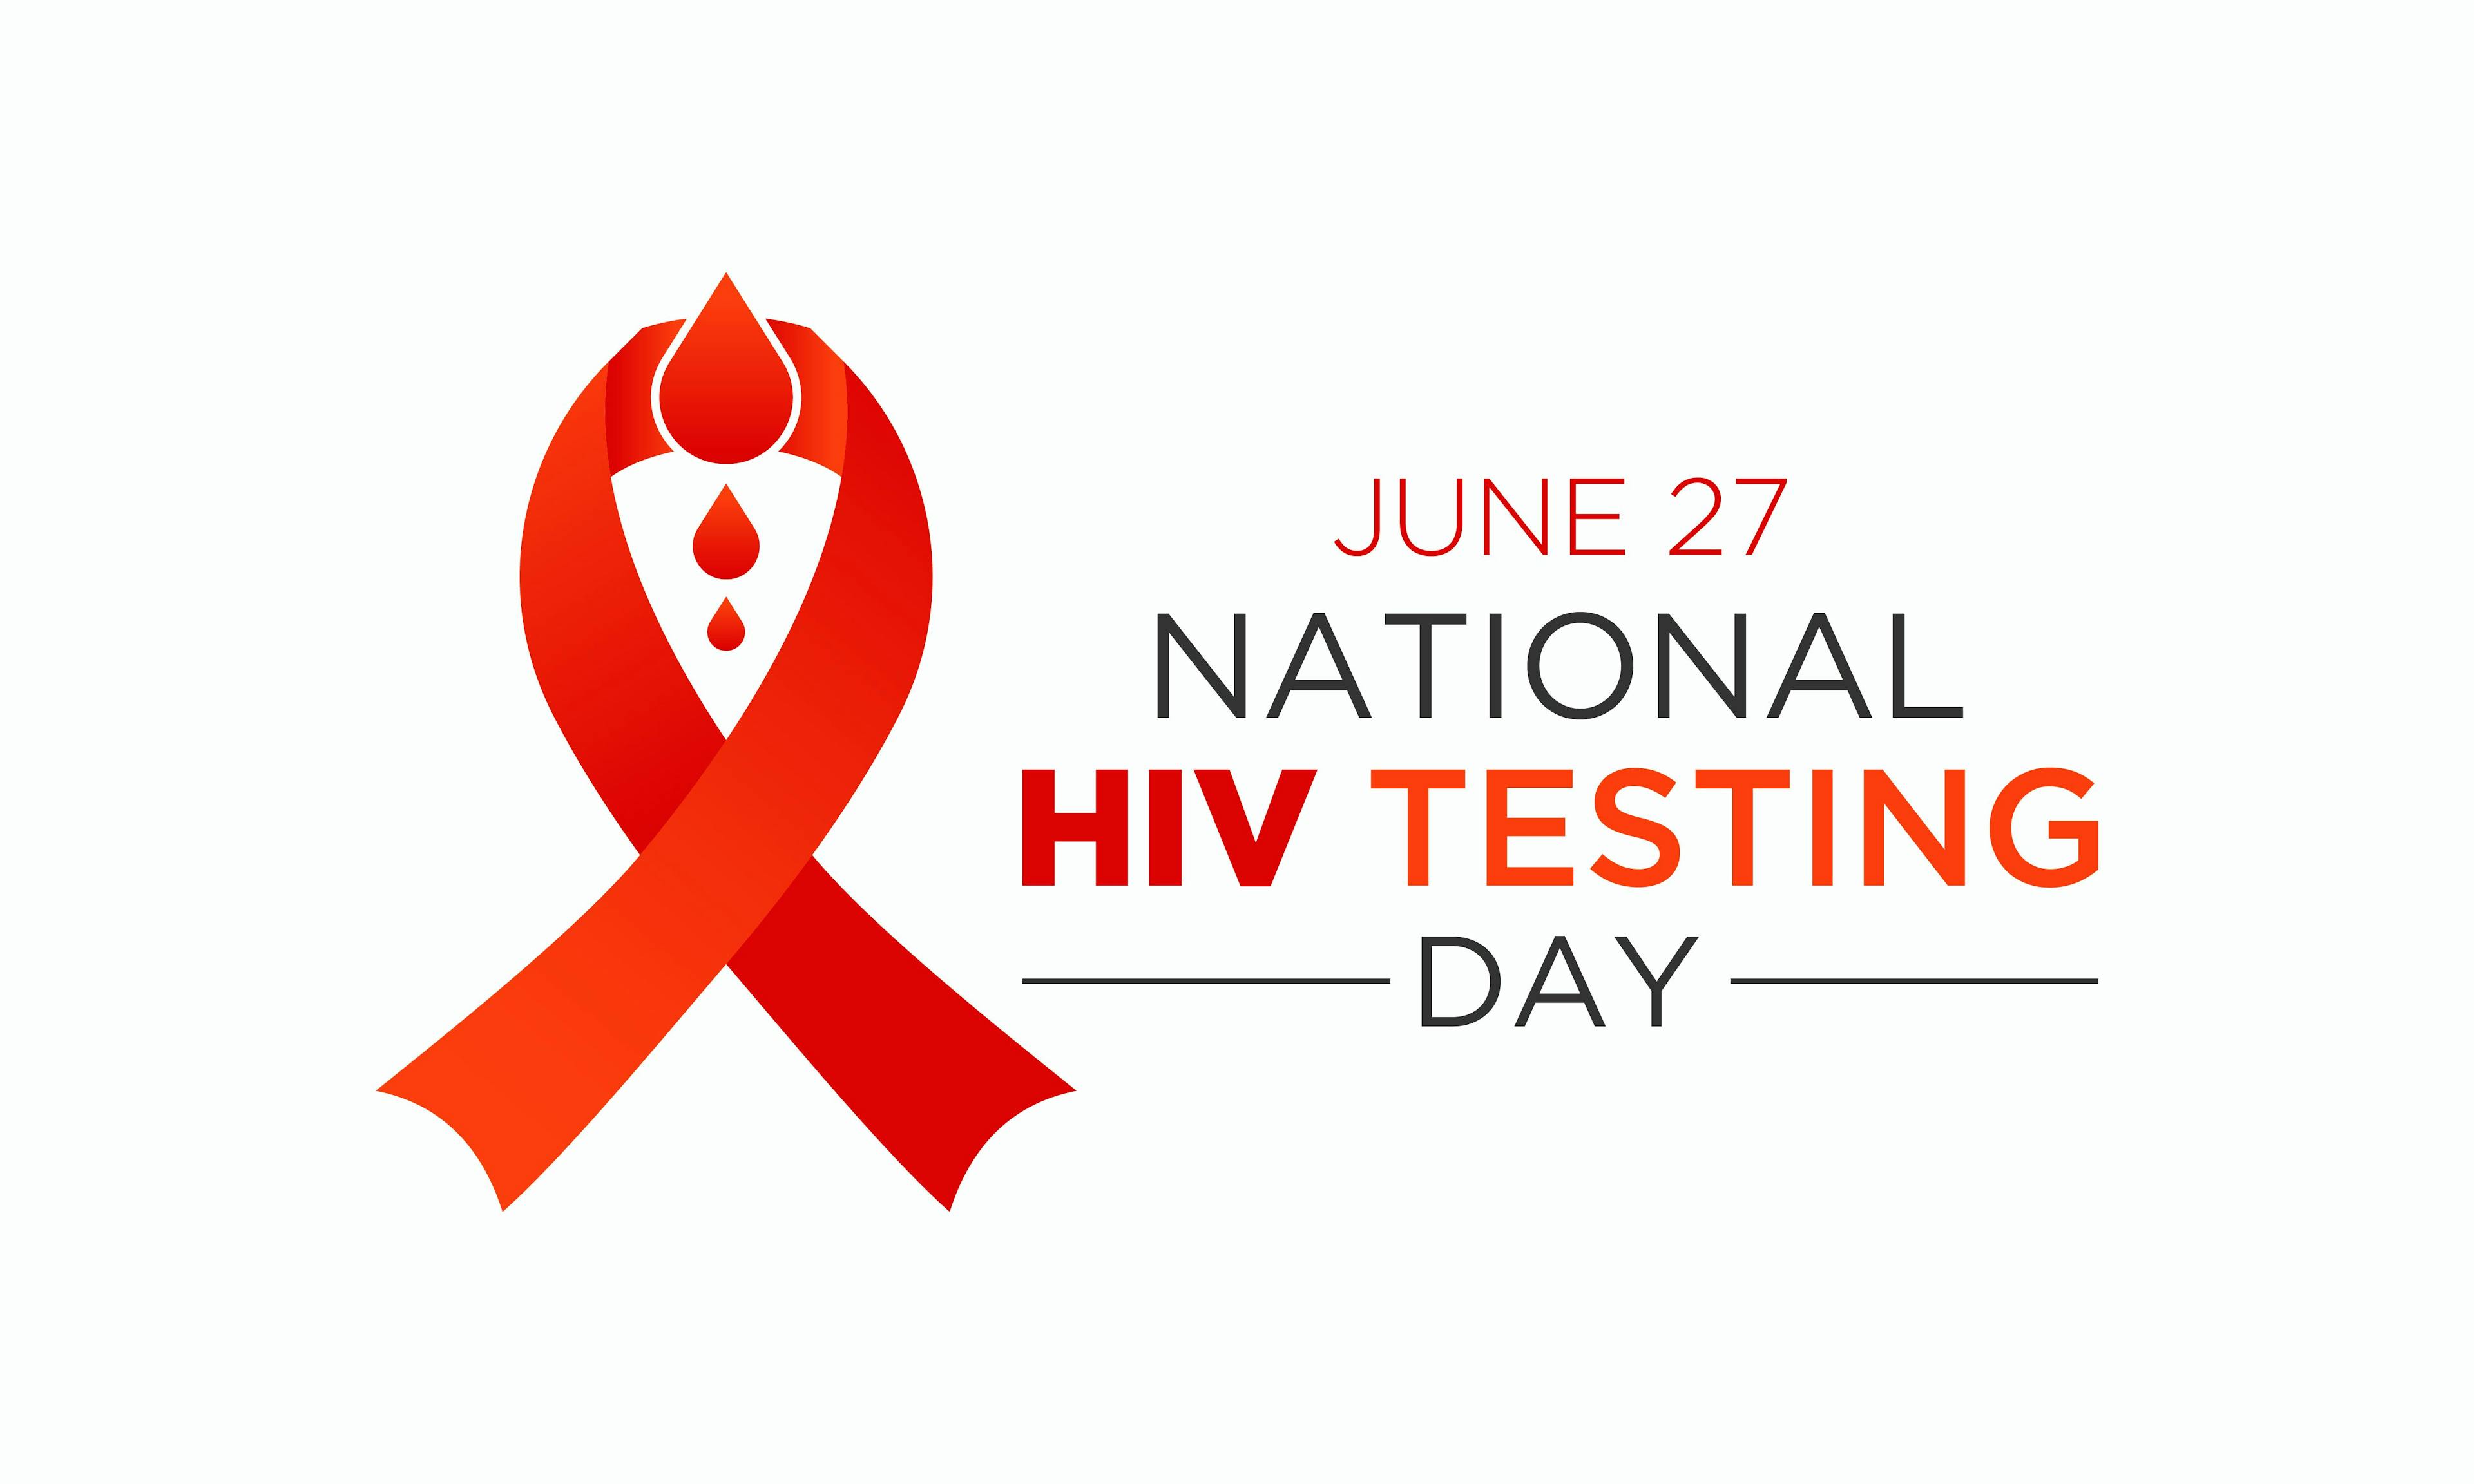 National HIV Testing Day encourages individuals to self-test for HIV as a means of demonstrating their compassion for themselves. | Image credit: ReotPixel - stock.adobe.com